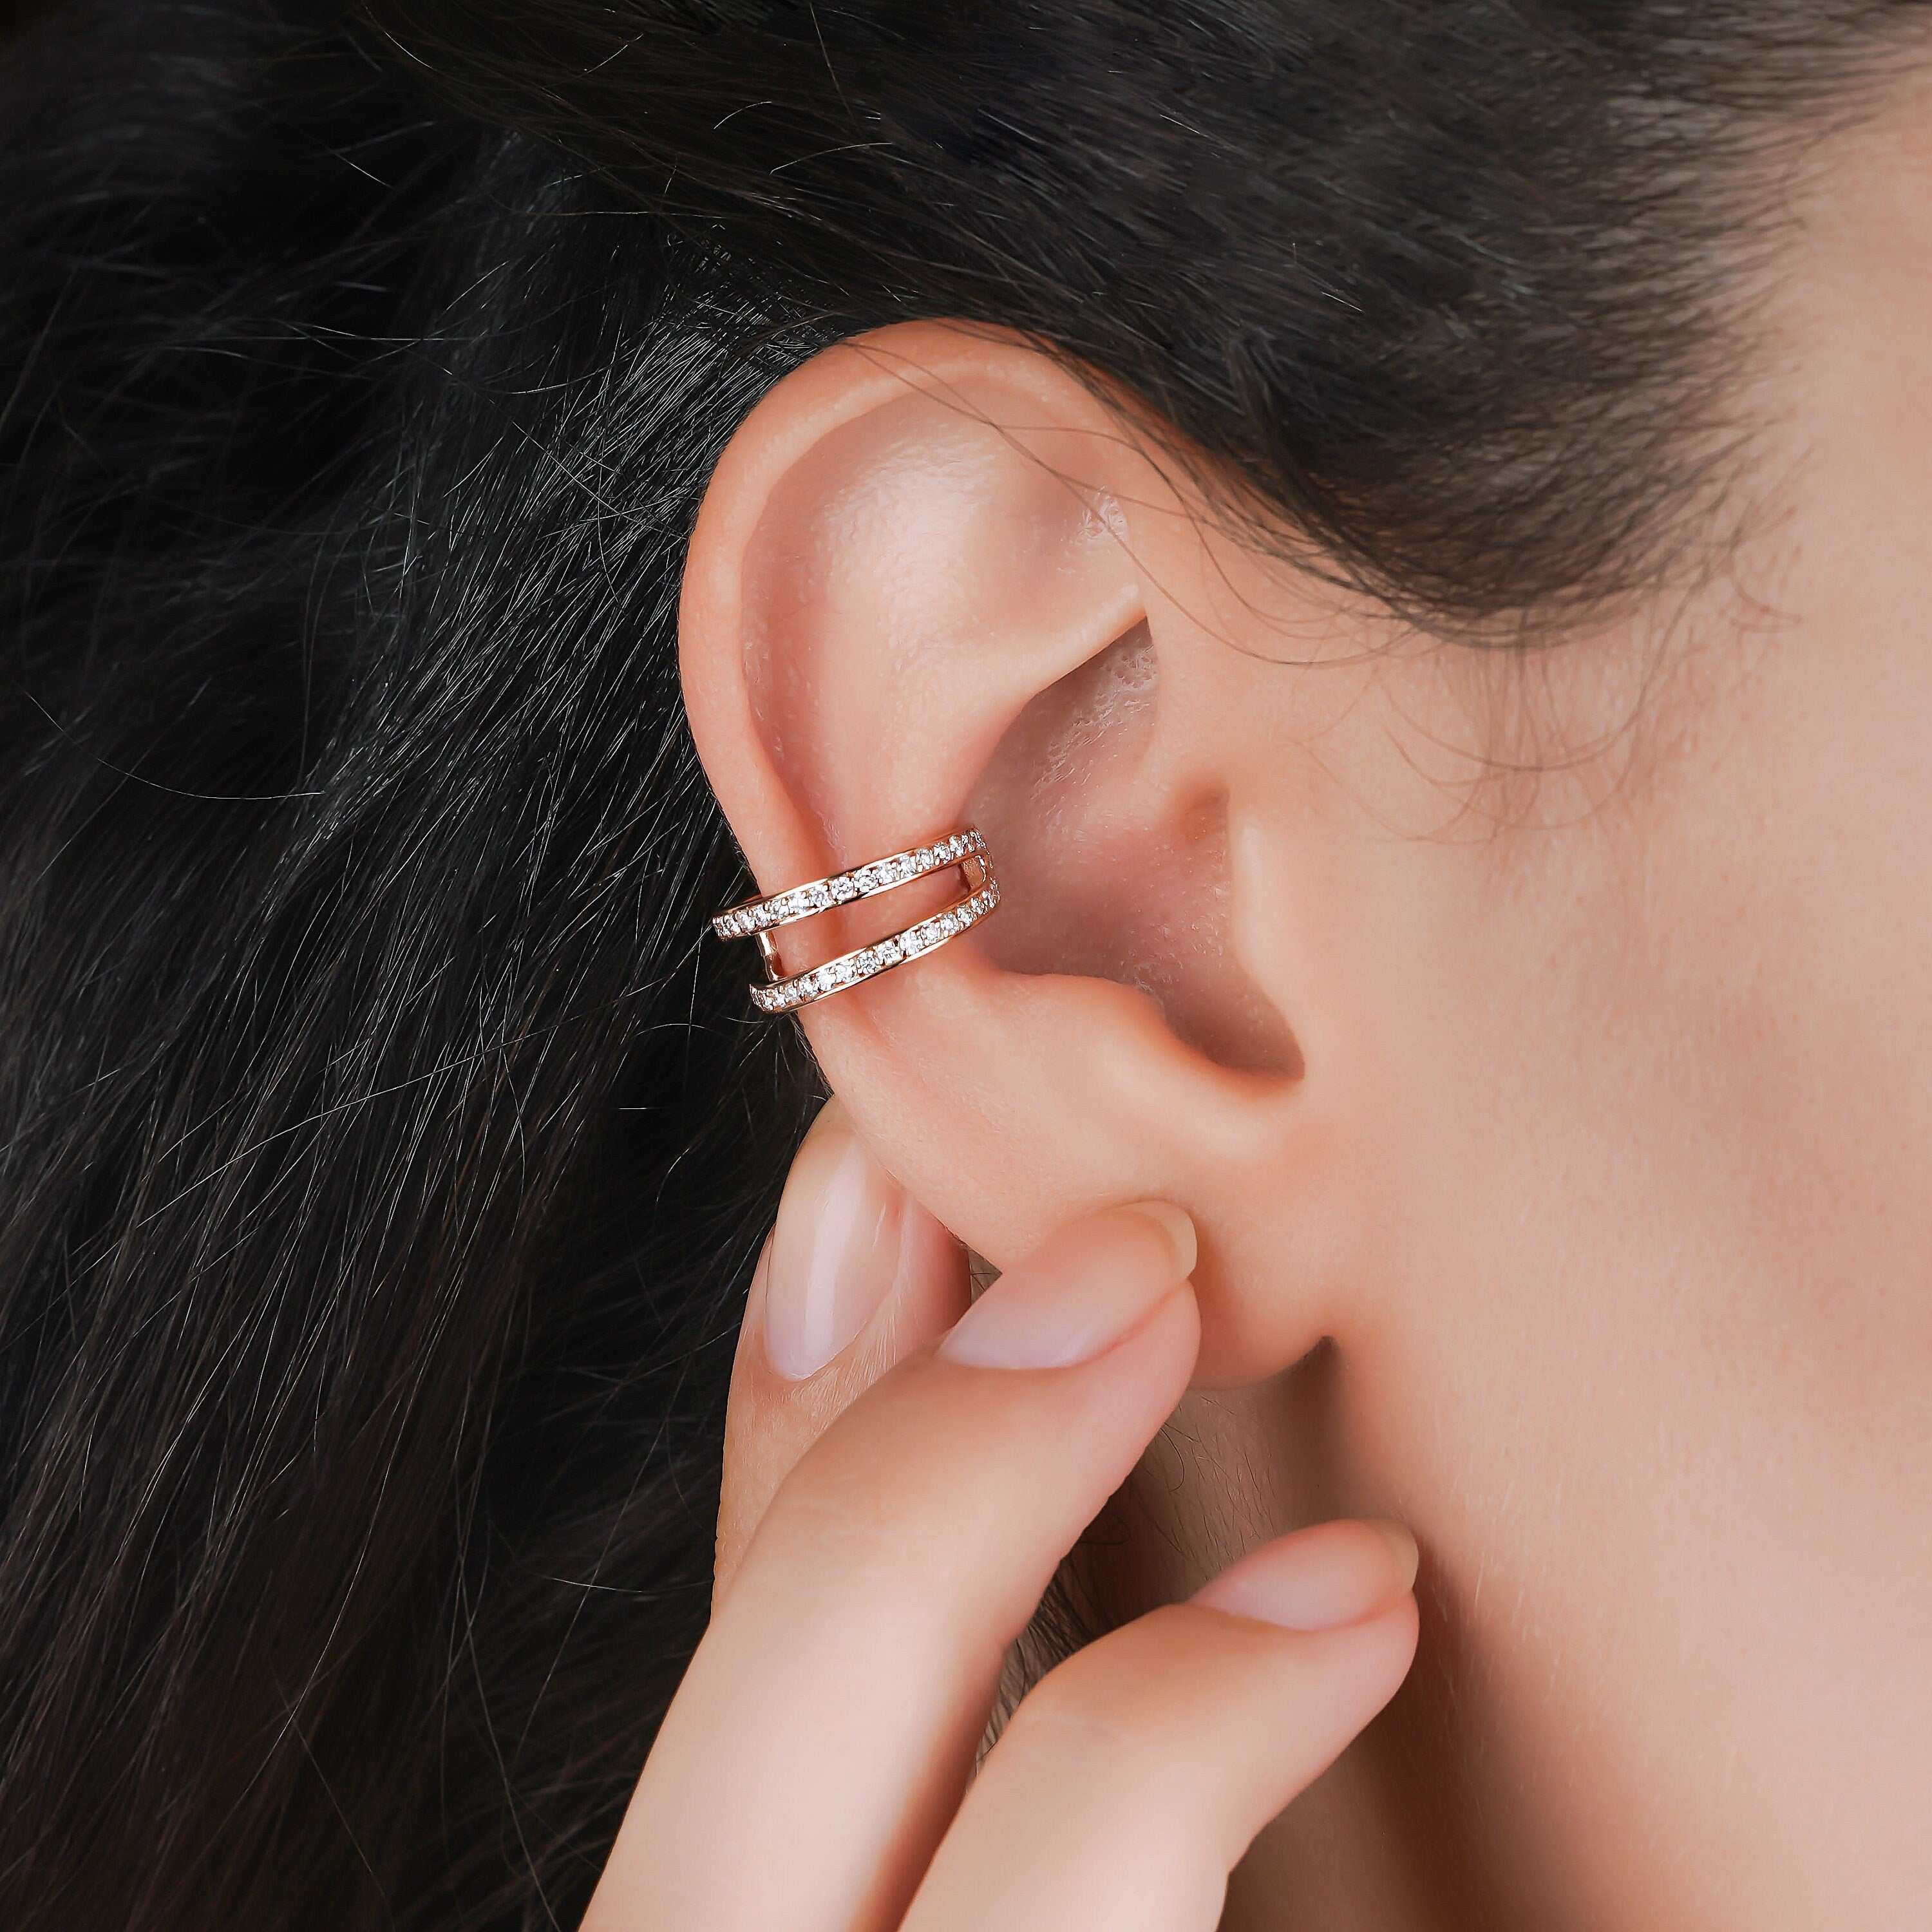 Double Ear Cuff Earring Available in 14K and 18K Gold